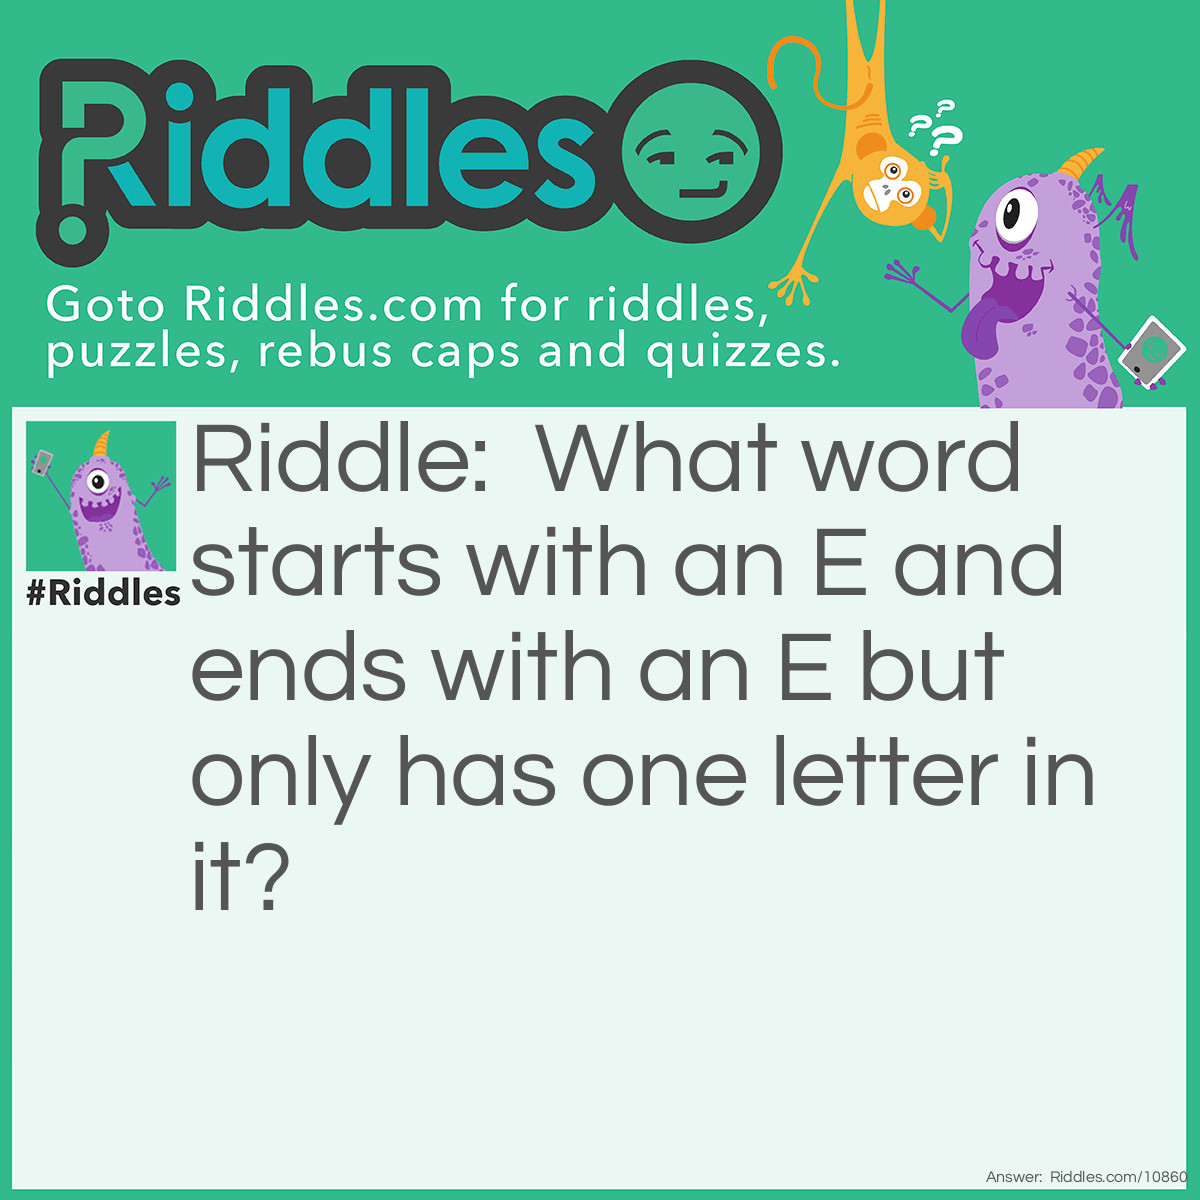 Riddle: What word starts with an E and ends with an E but only has one letter in it? Answer: An envelope.